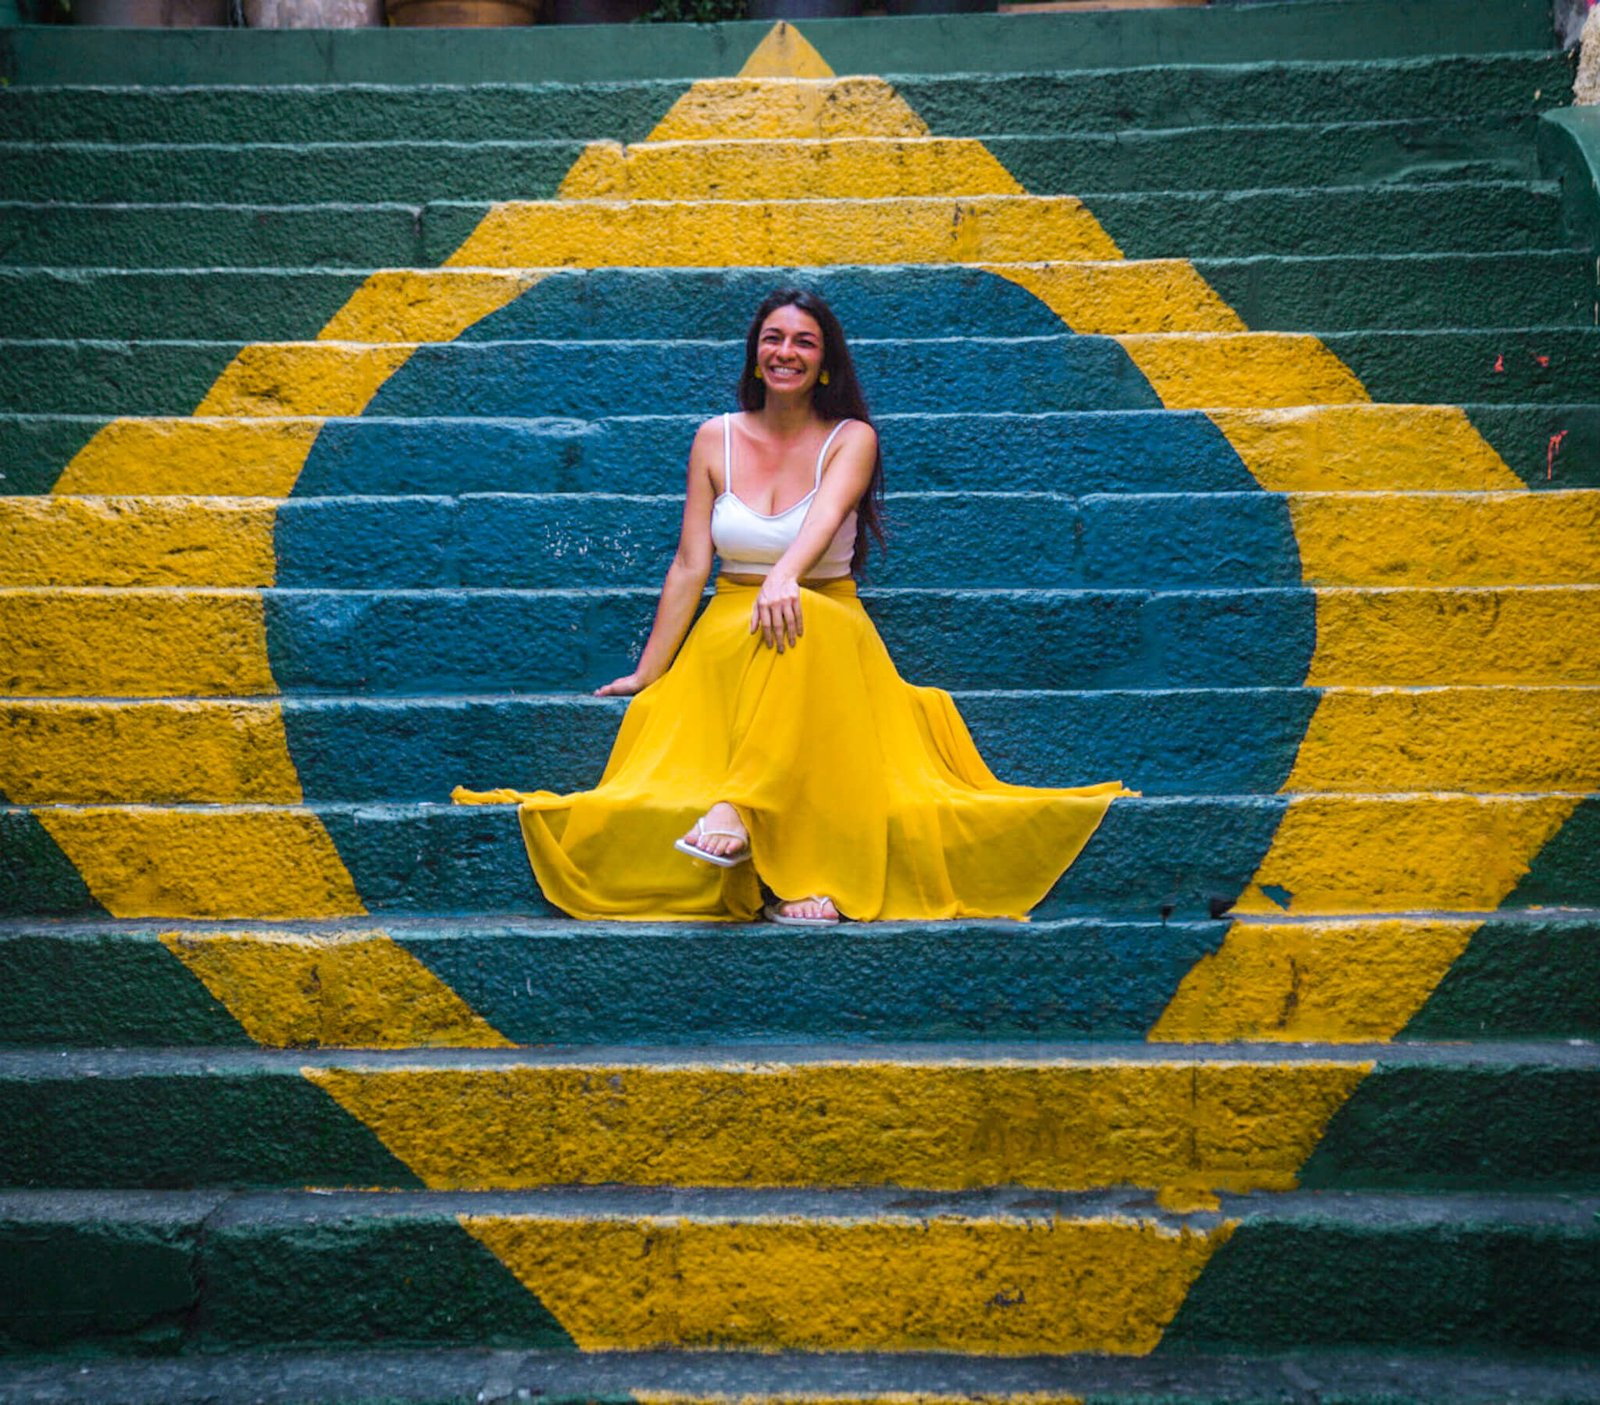 Brazilian flag stairs, Instagrammable places in Rio de Janeiro